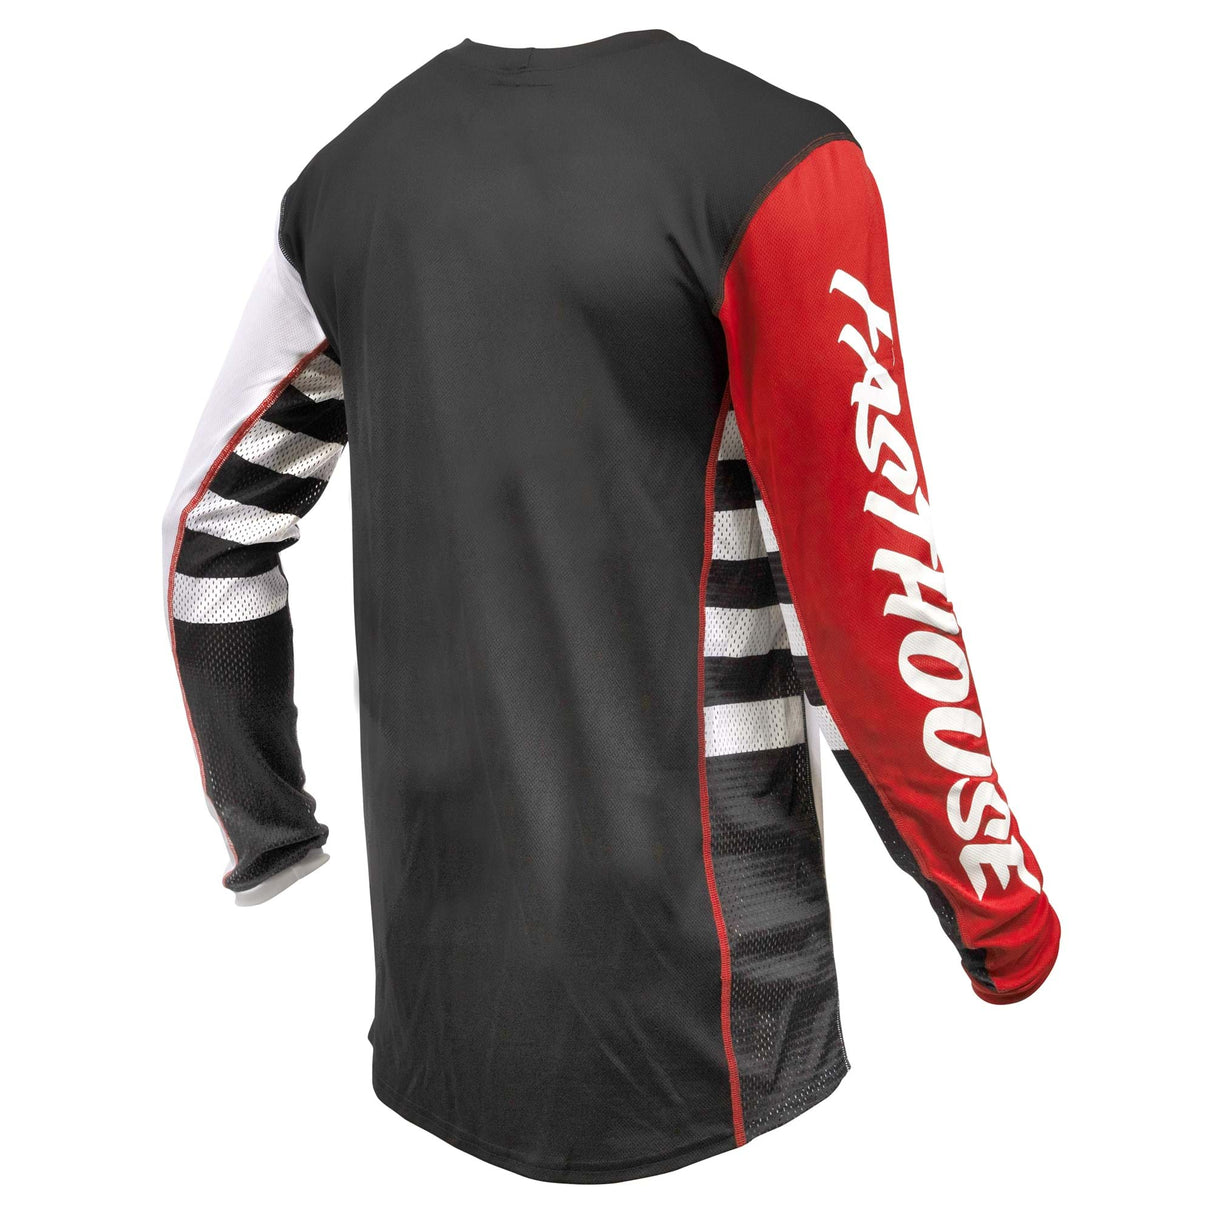 Fasthouse USA Grindhouse Factor Long Sleeve Jersey